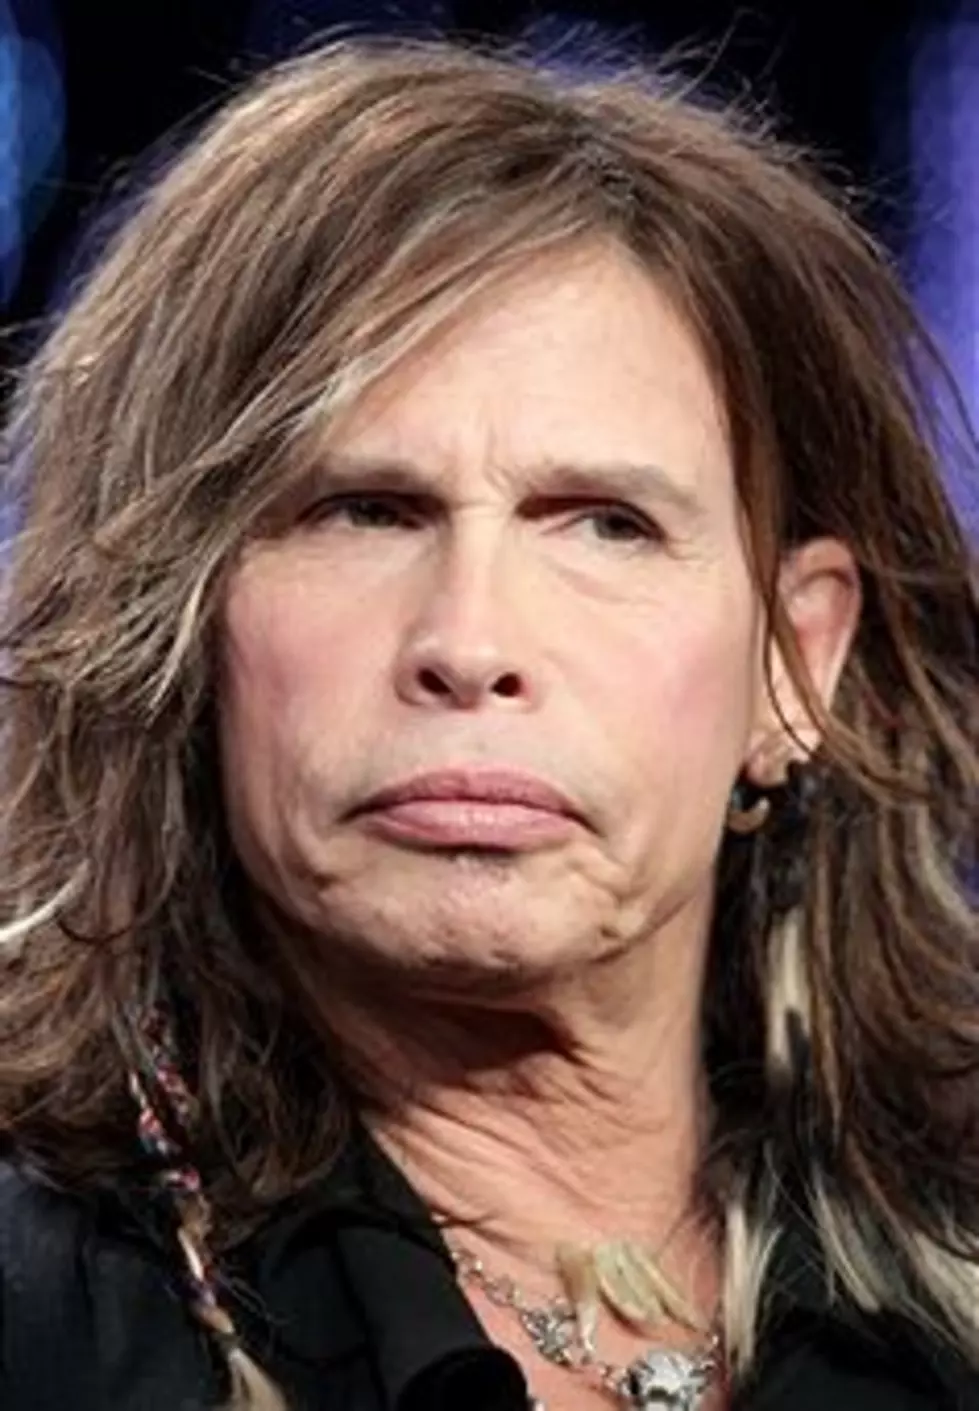 25 Things You Don’t Know About Steven Tyler